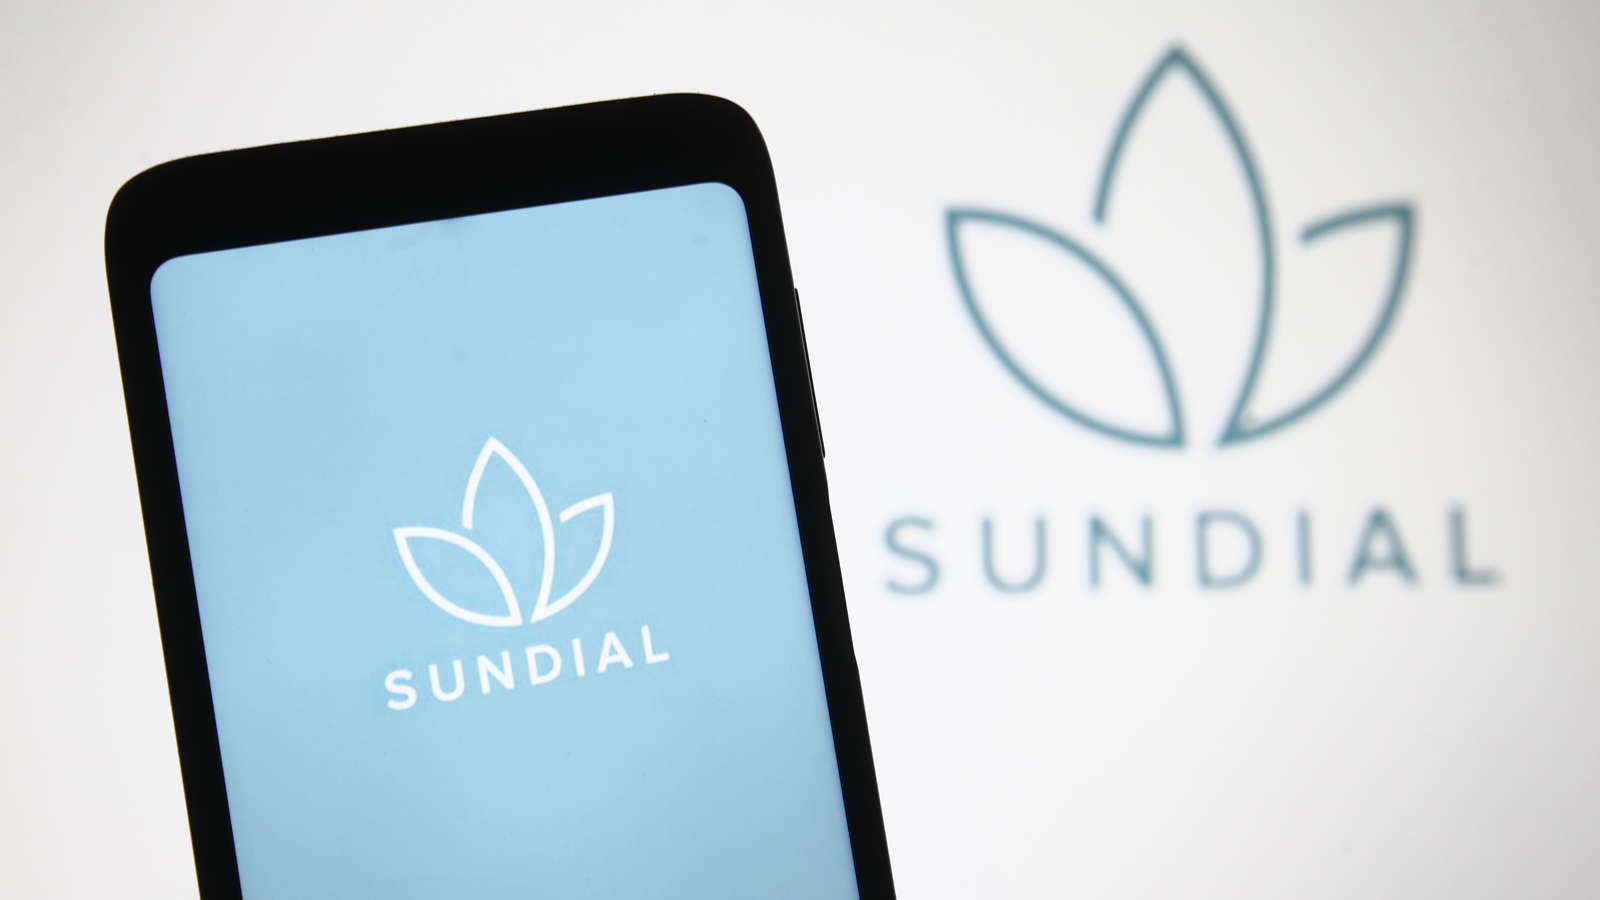 The Sundial Growers (SNDL) logo is on a phone screen with a light blue background in front of the sundial logo on a white background